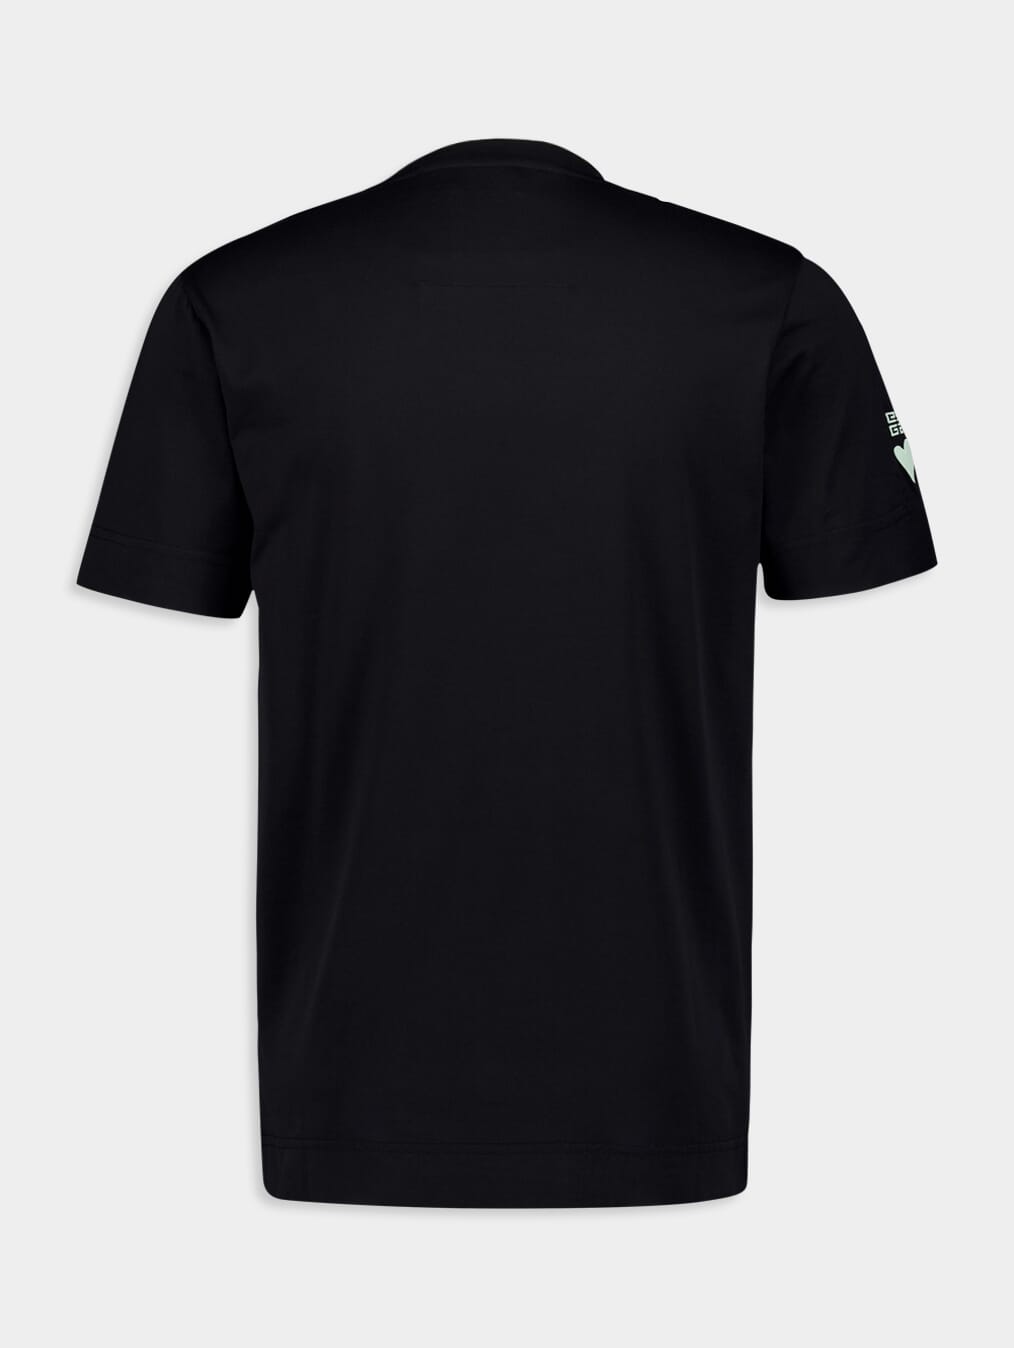 GivenchyX Chito Slim Fit Cotton T-Shirt With GIVENCHY Infinity Print at Fashion Clinic